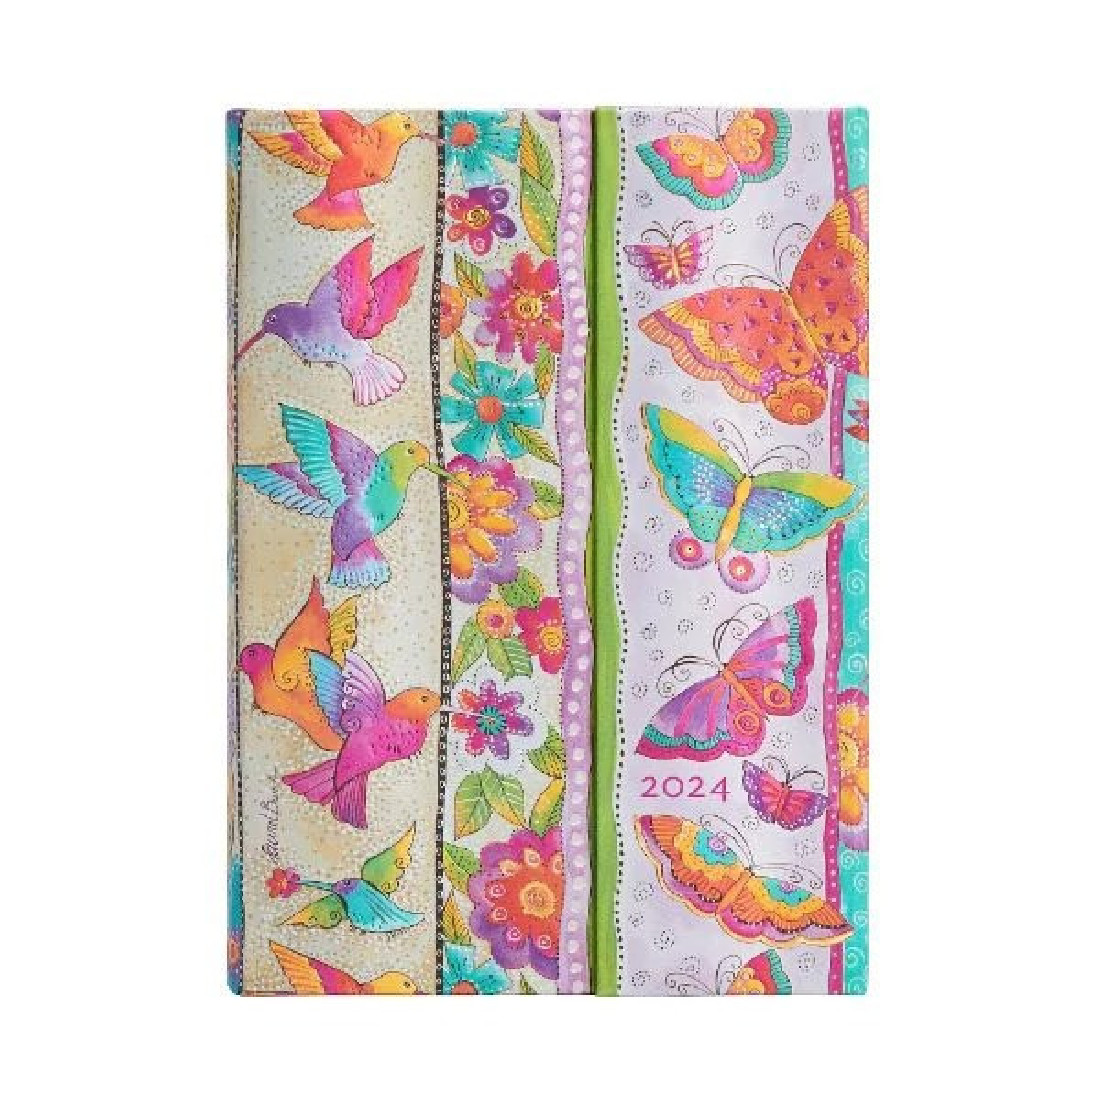 Paperblanks 12 month planner hard cover with wrap magnetic closure 2024 Hummingbirds and Flutterbyes, Playful creations,  midi 13x18 daily